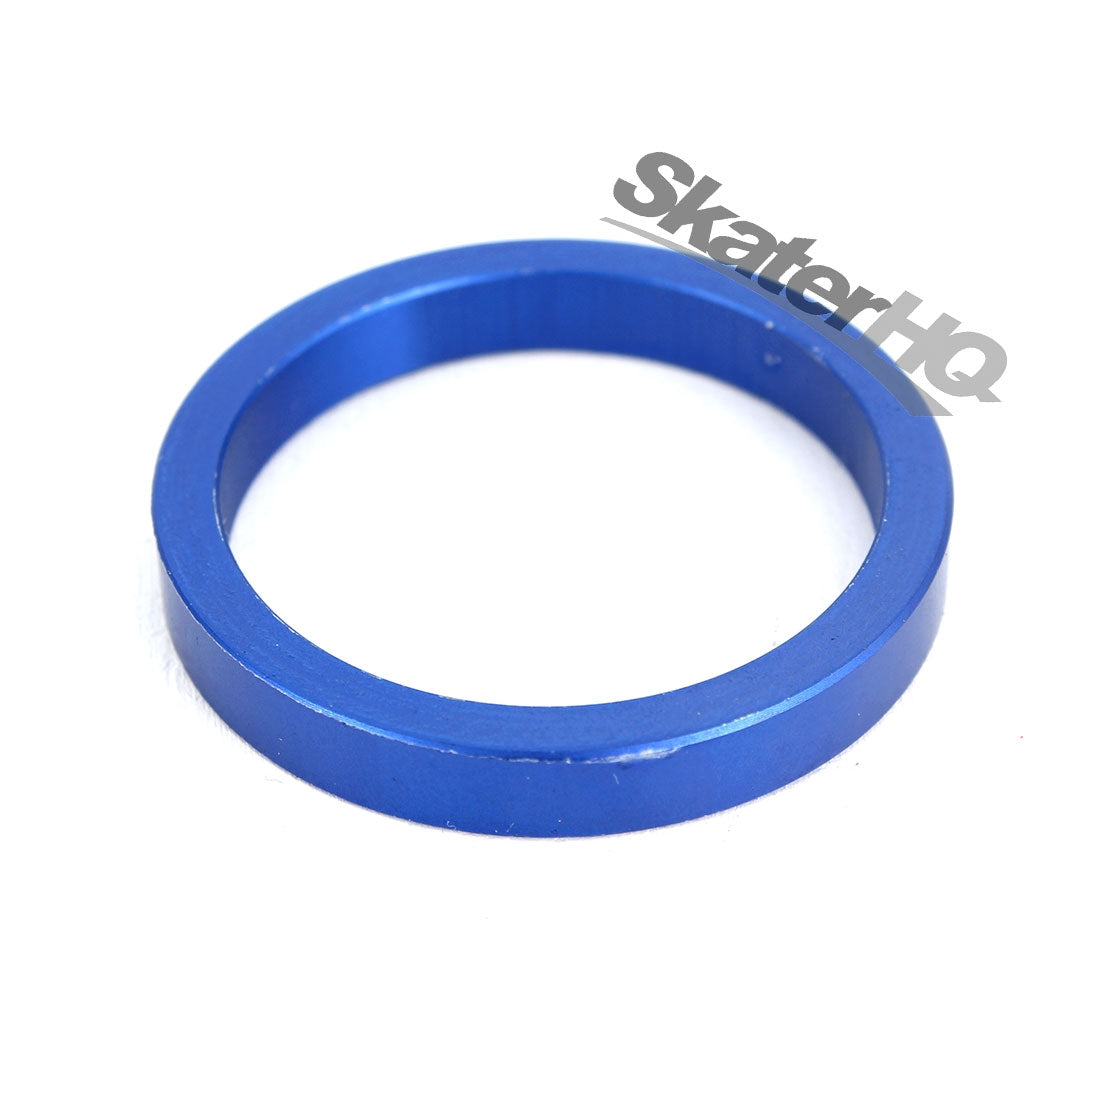 5mm Headset Spacer - Blue Scooter Hardware and Parts